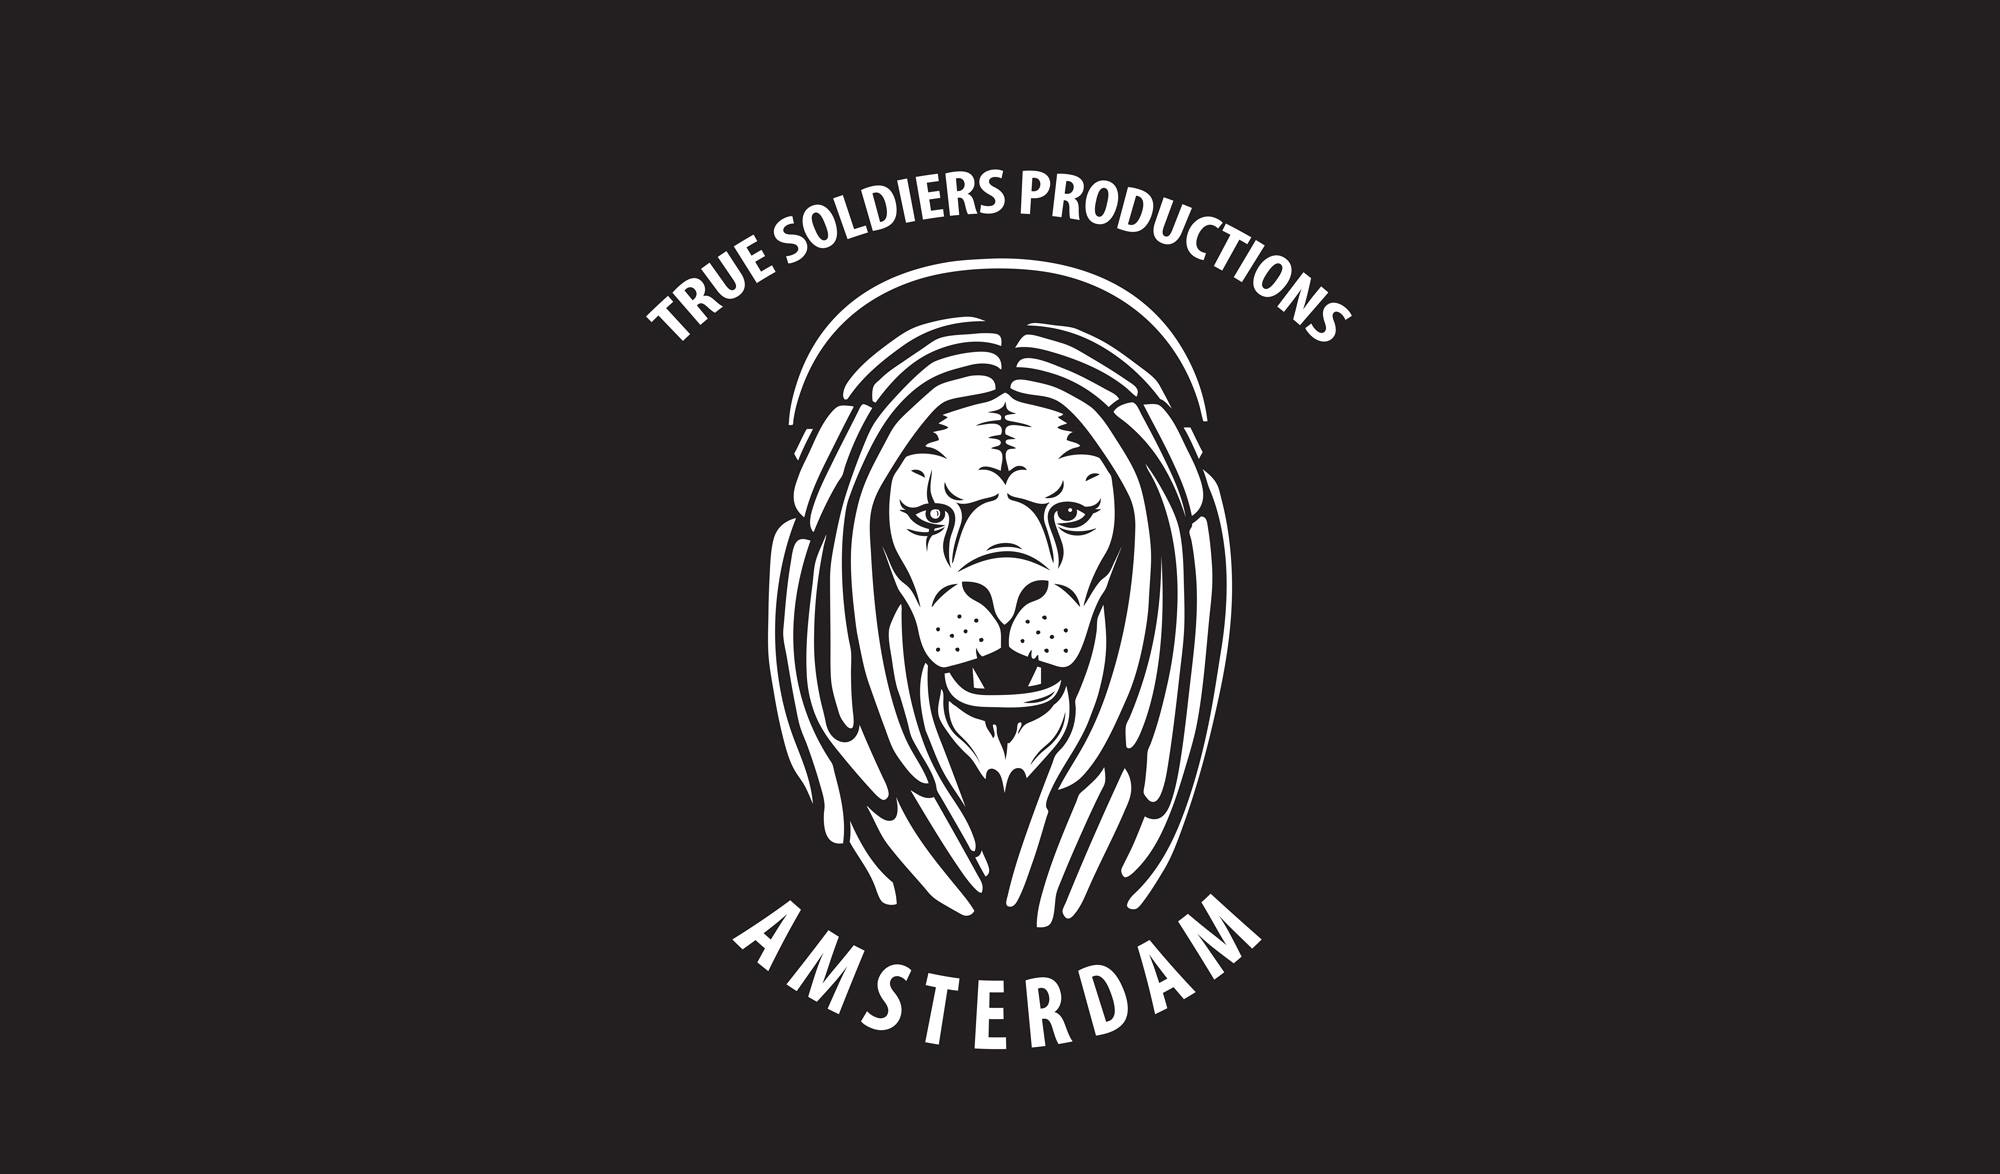 true soldiers productions